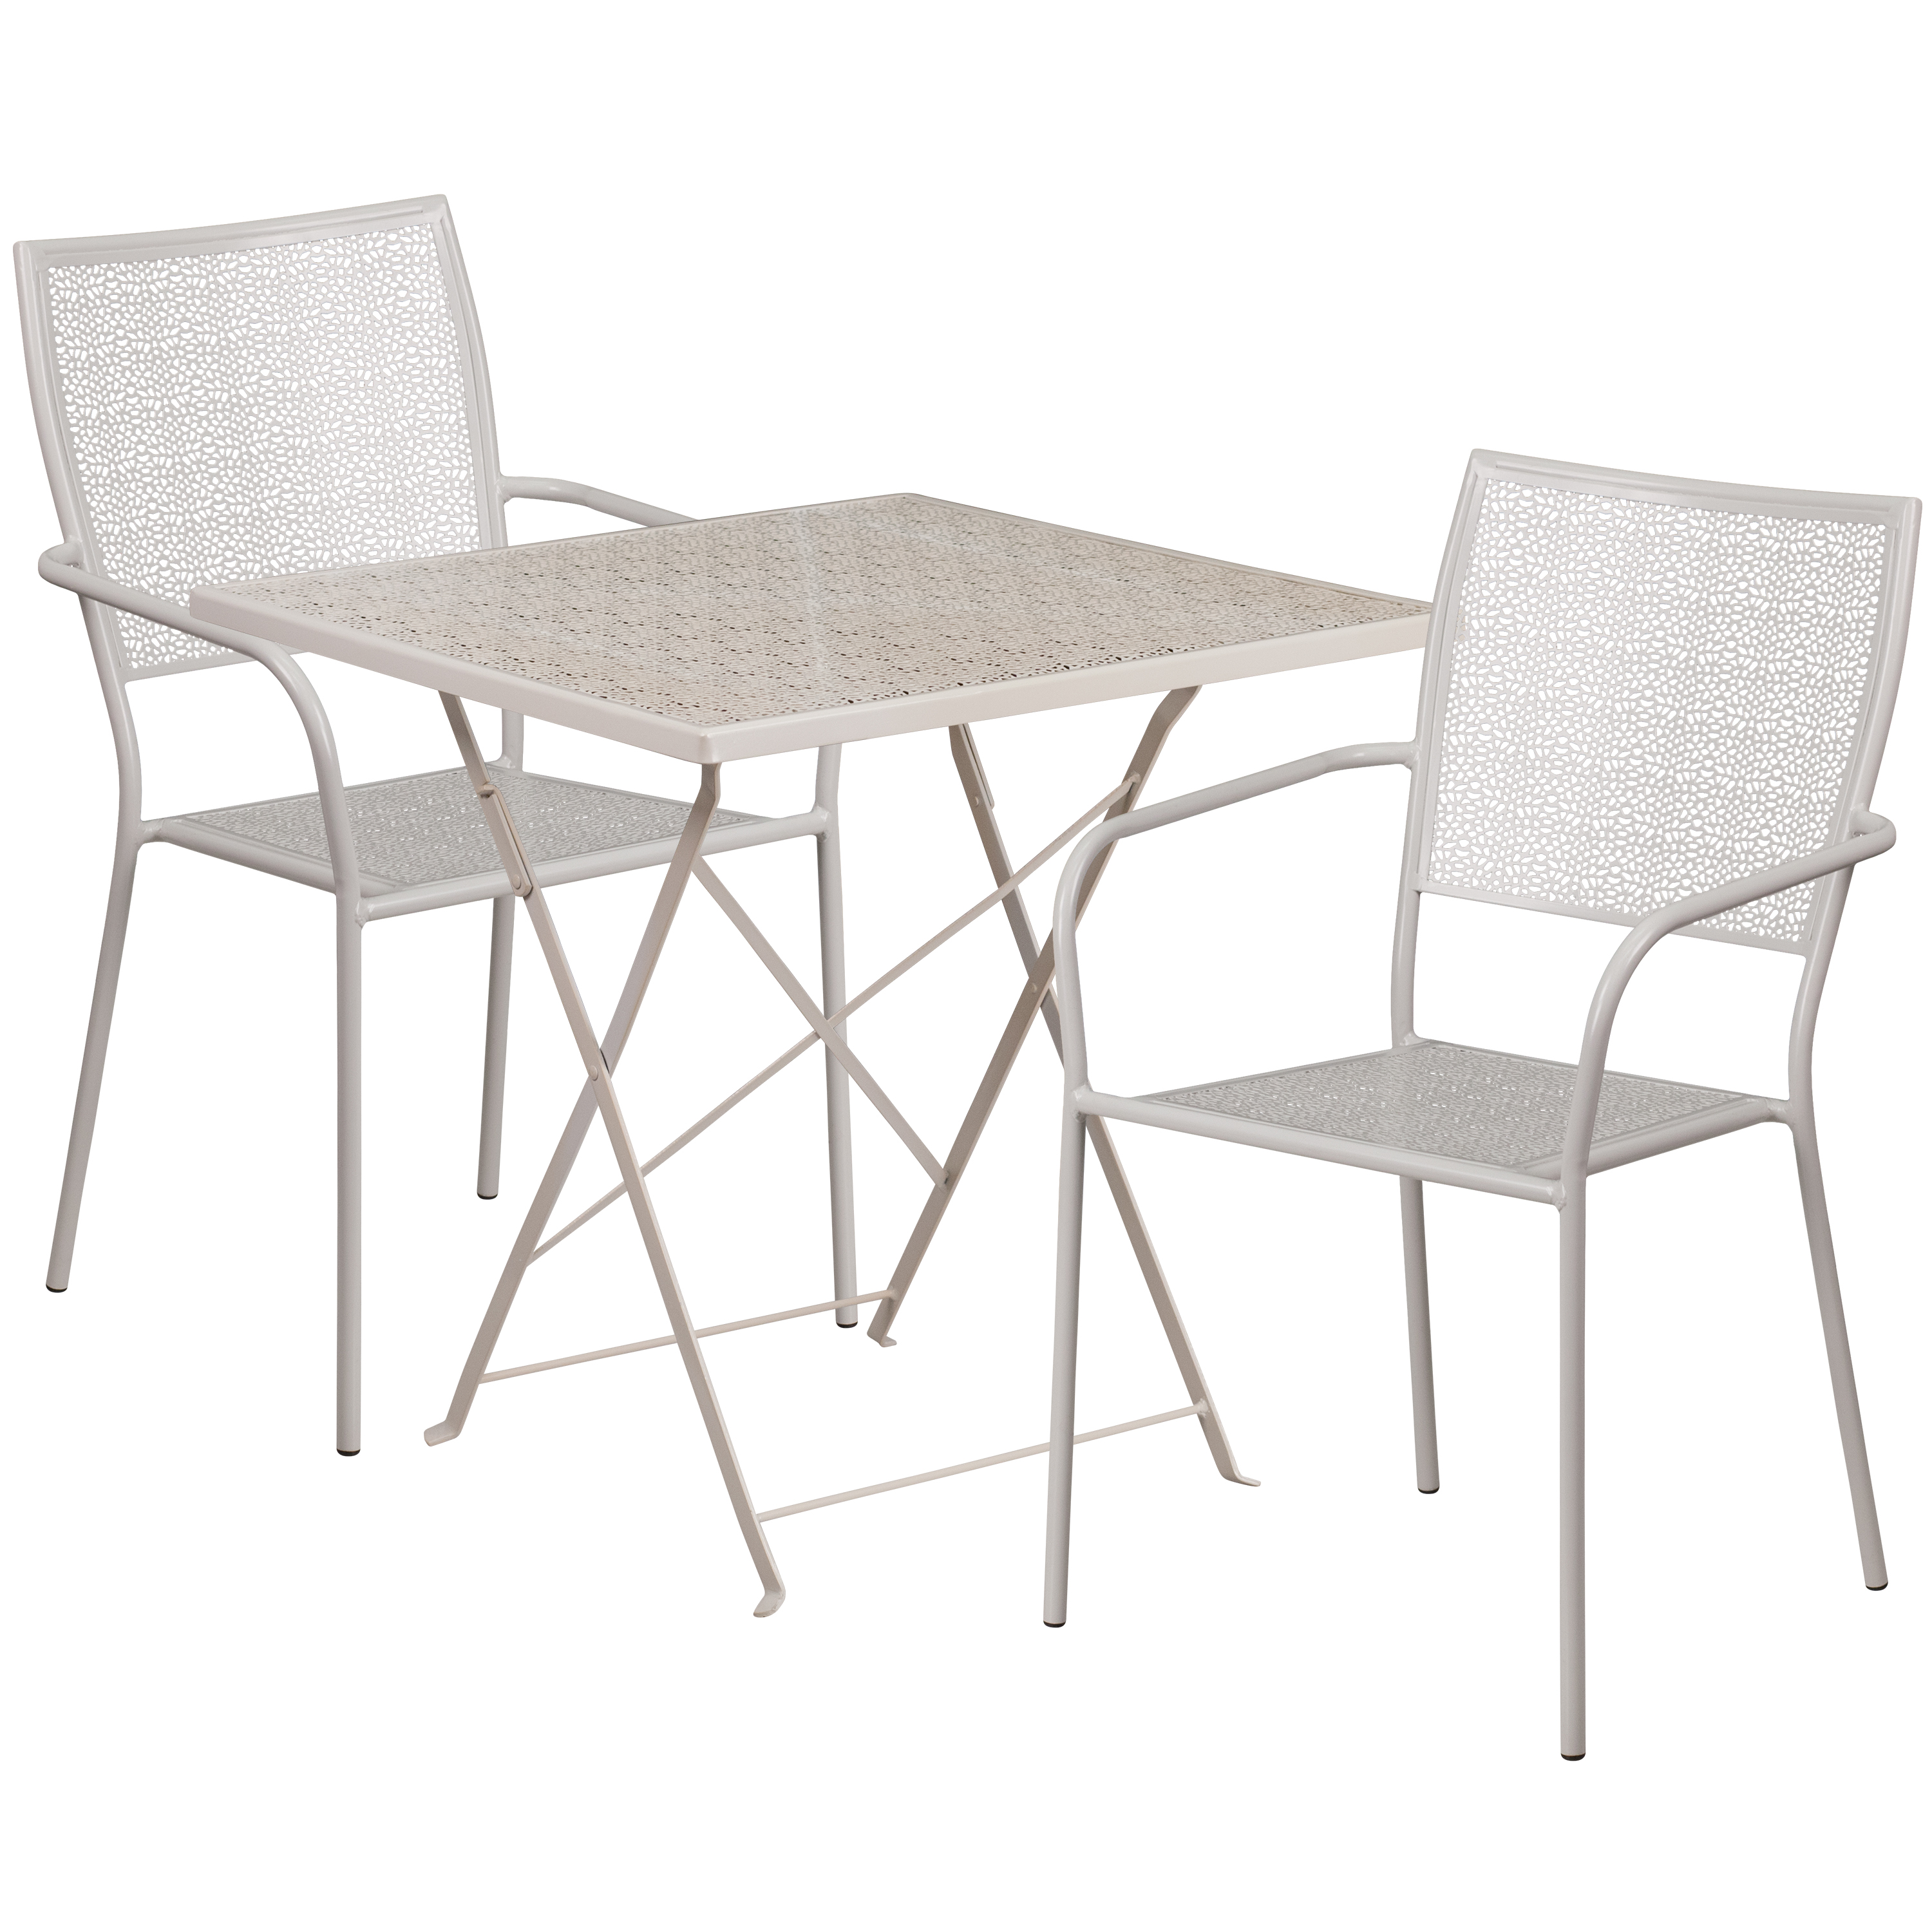 Flash Furniture CO-28SQF-02CHR2-SIL-GG 28" Square Light Gray Indoor/Outdoor Steel Folding Patio Table Set with 2 Square Back Chairs